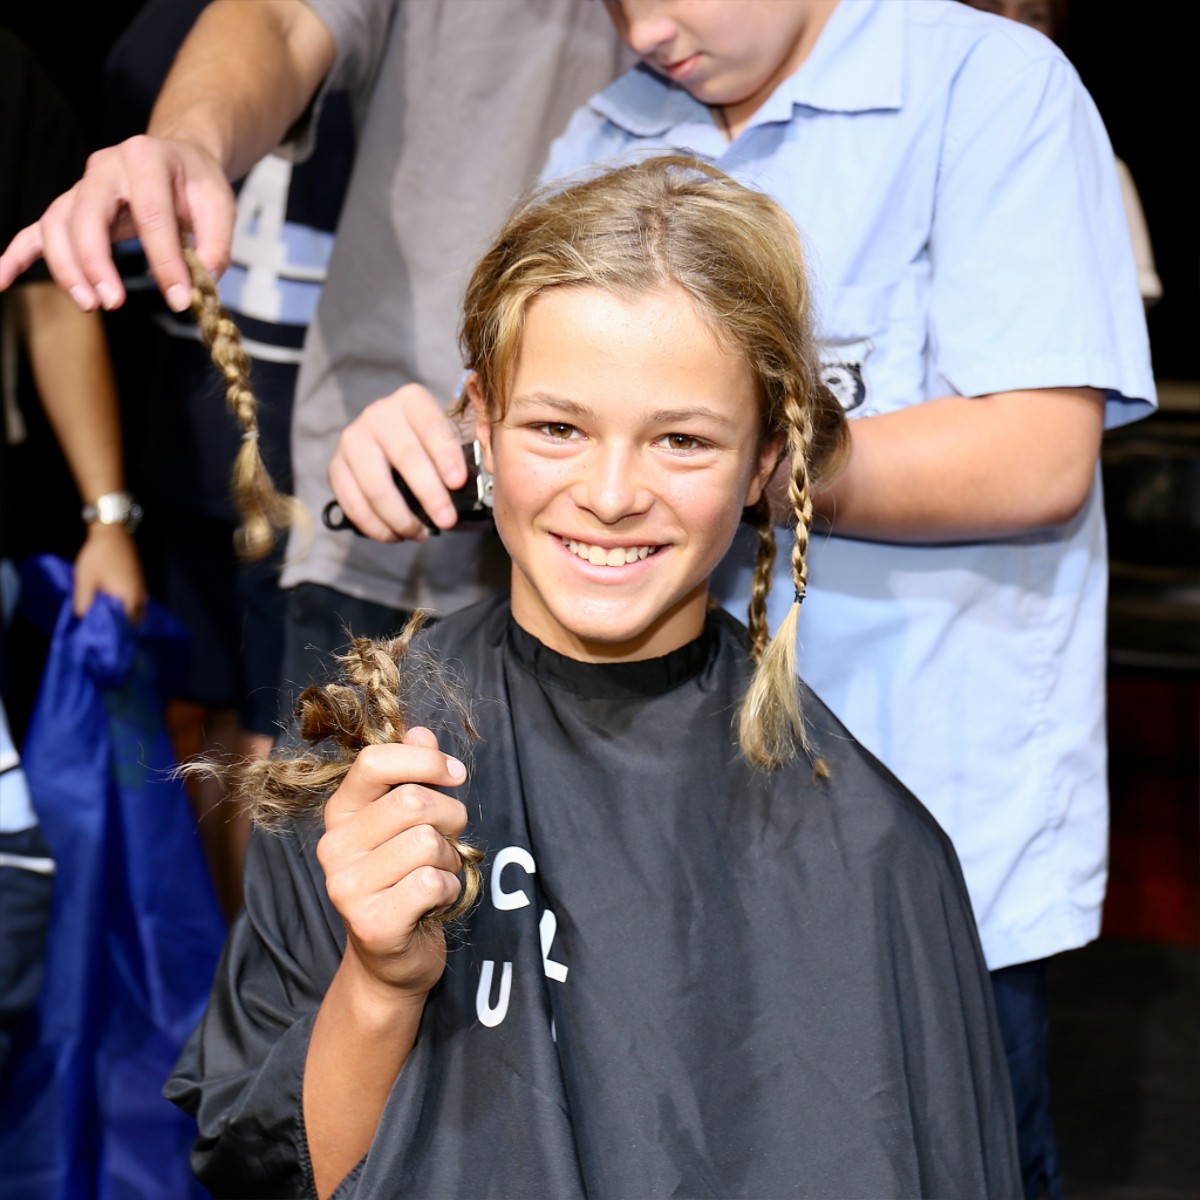 Shaving lives!… 🤷‍♂️😅🪒

Congratulations to Merewether High School for raising more than $400,000 for the World’s Greatest Shave!

Read the full story here 👉 brnw.ch/21wIQyS

📷 Merewether High School

#LoveWhereYouLearn